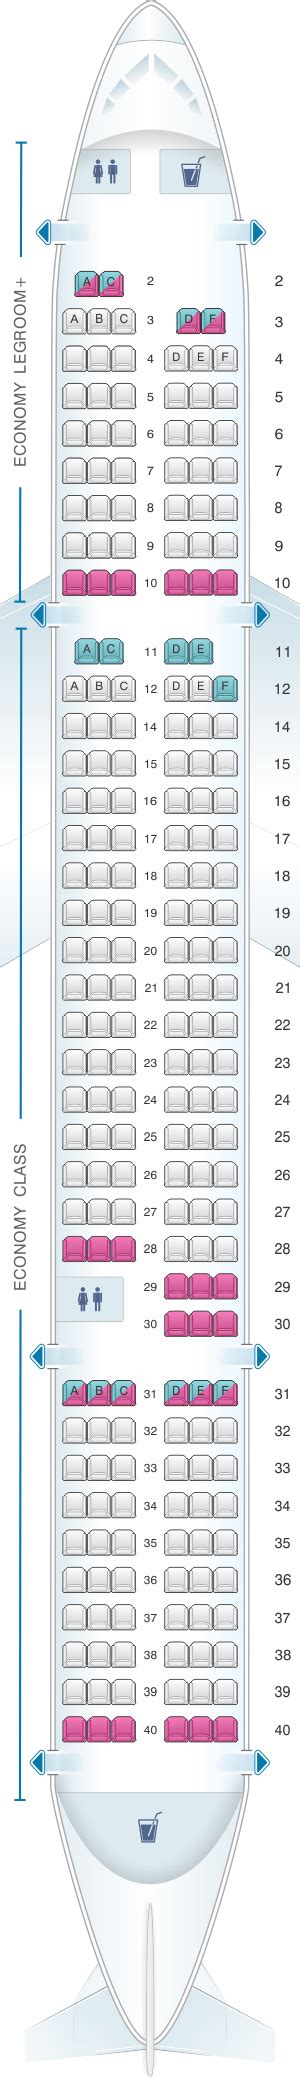 Seating Chart Allegiant Airlines